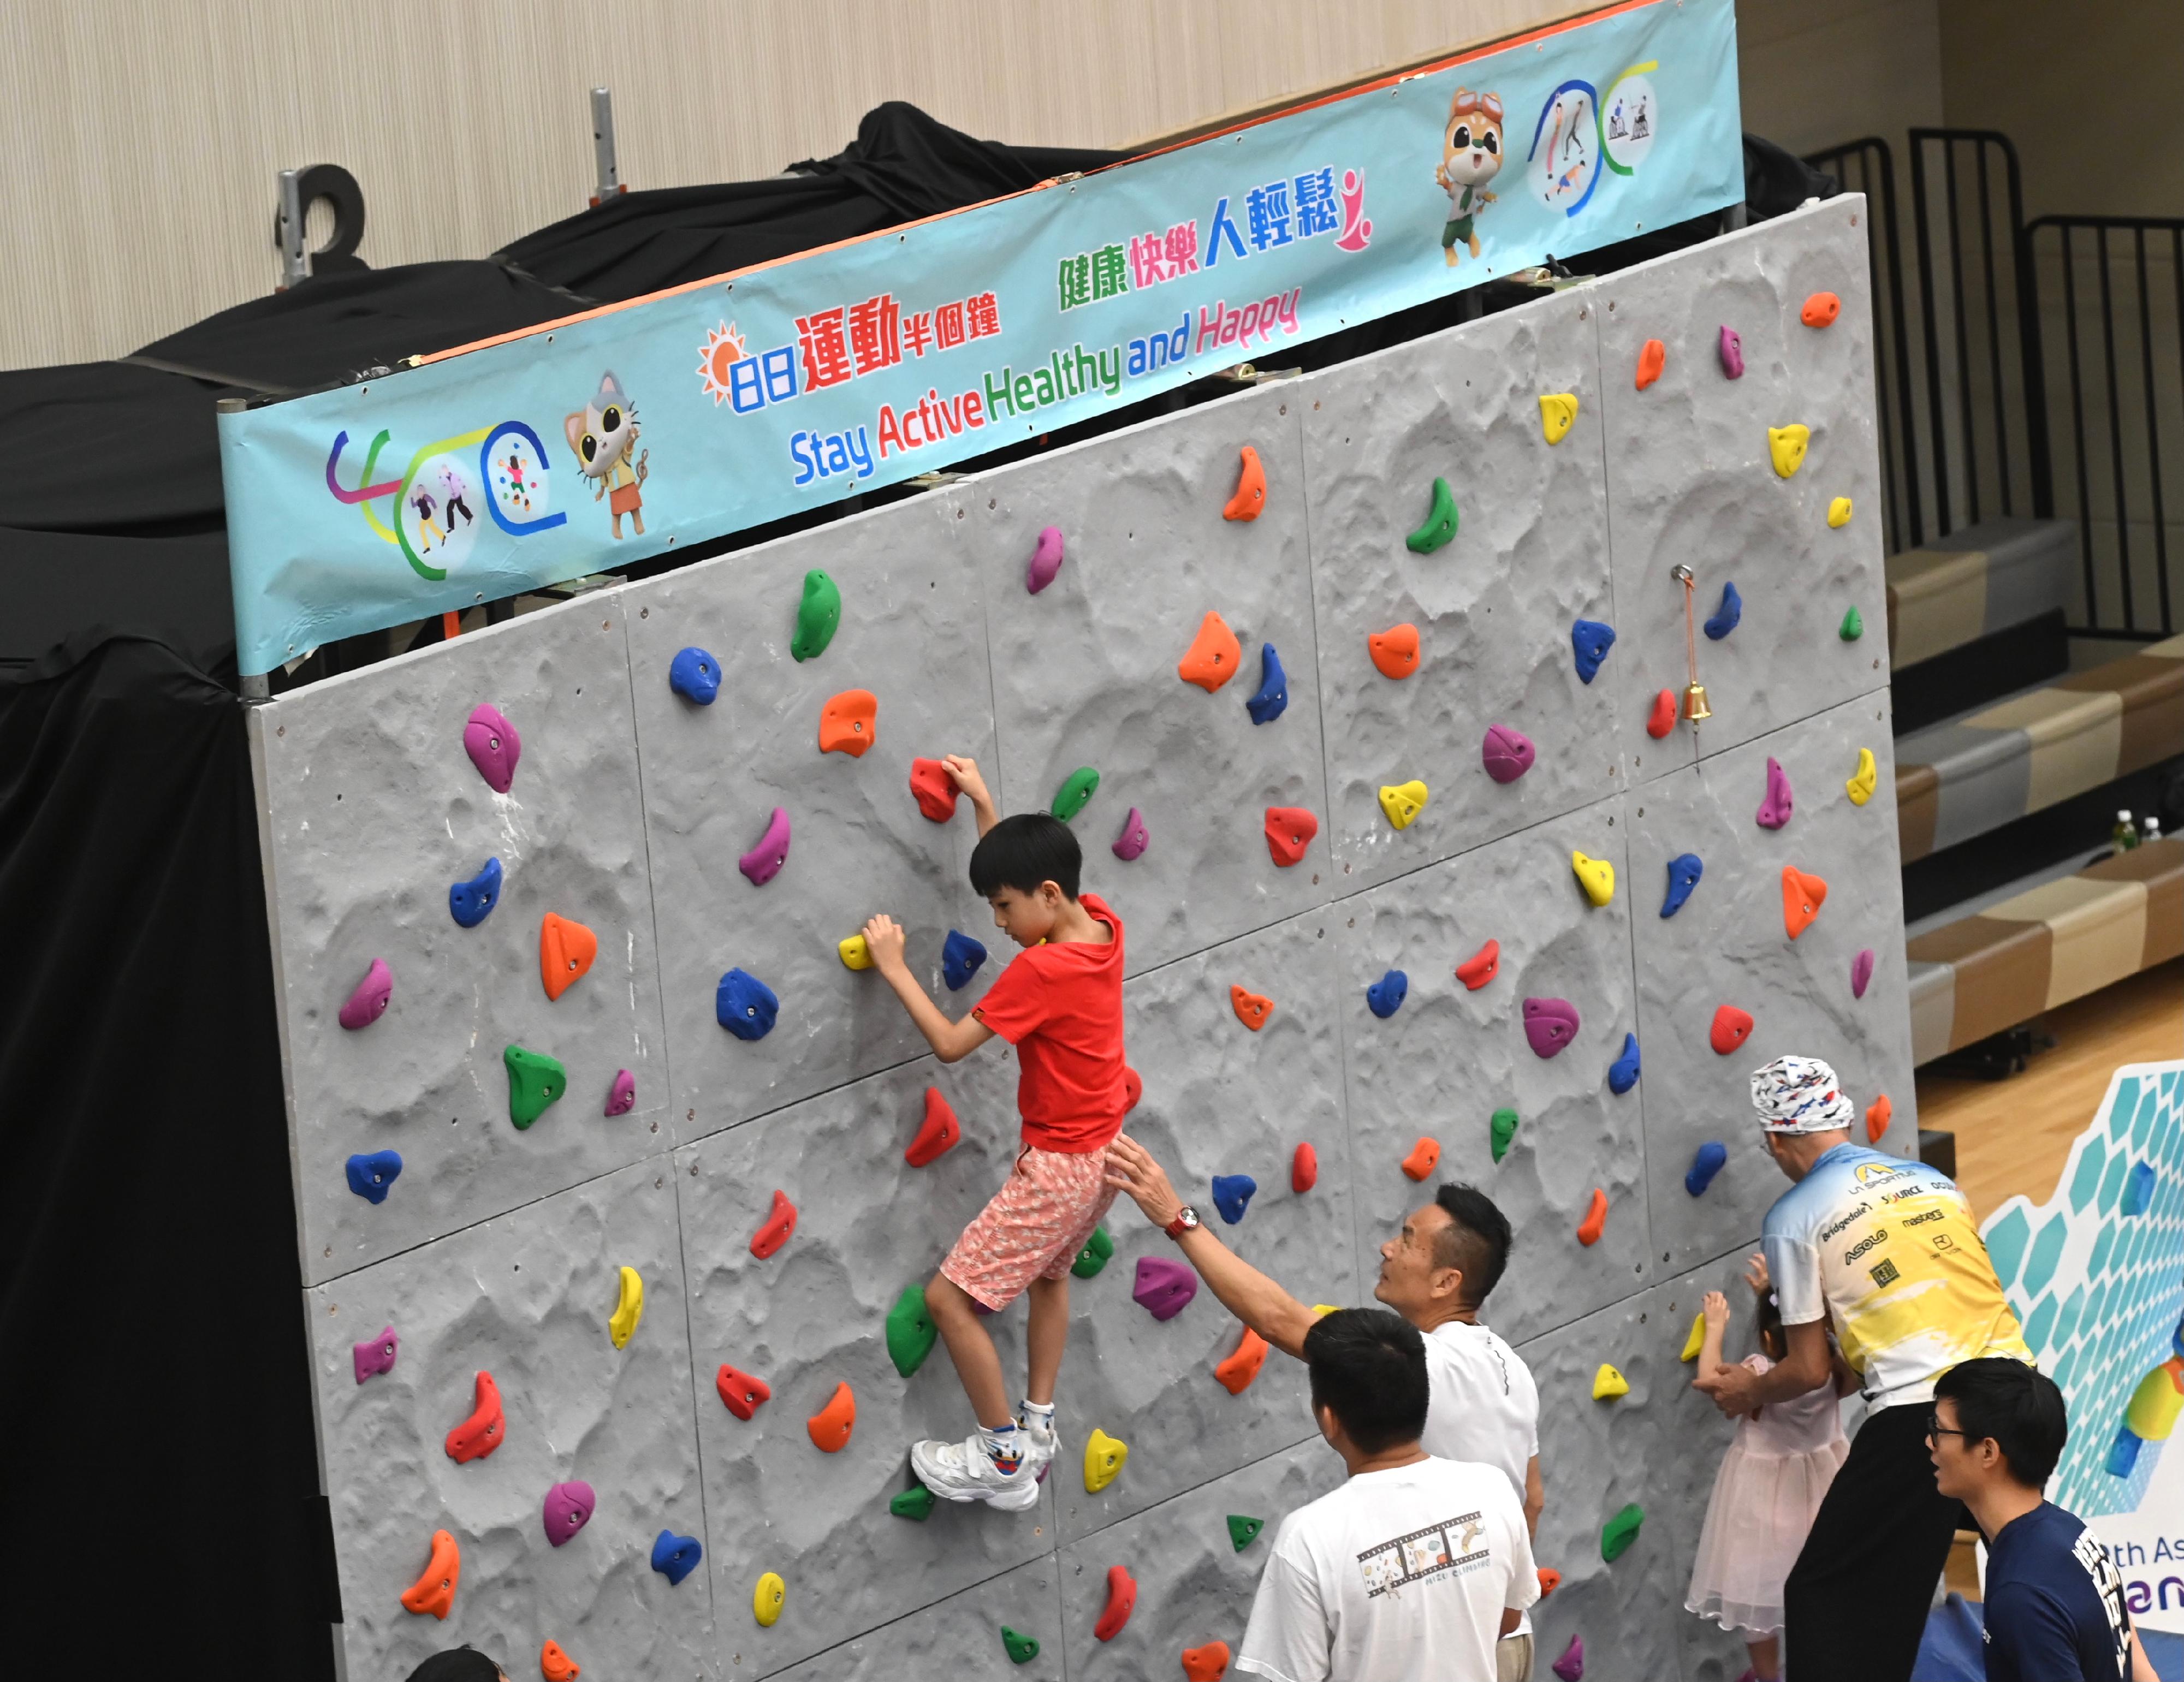 The Sport For All Day 2023 was held by the Leisure and Cultural Services Department today (August 6) with free recreation and sports programmes at designated sports centres in 18 districts for the public to join. Photo shows a member of the public taking part in sports climbing play-in session.

